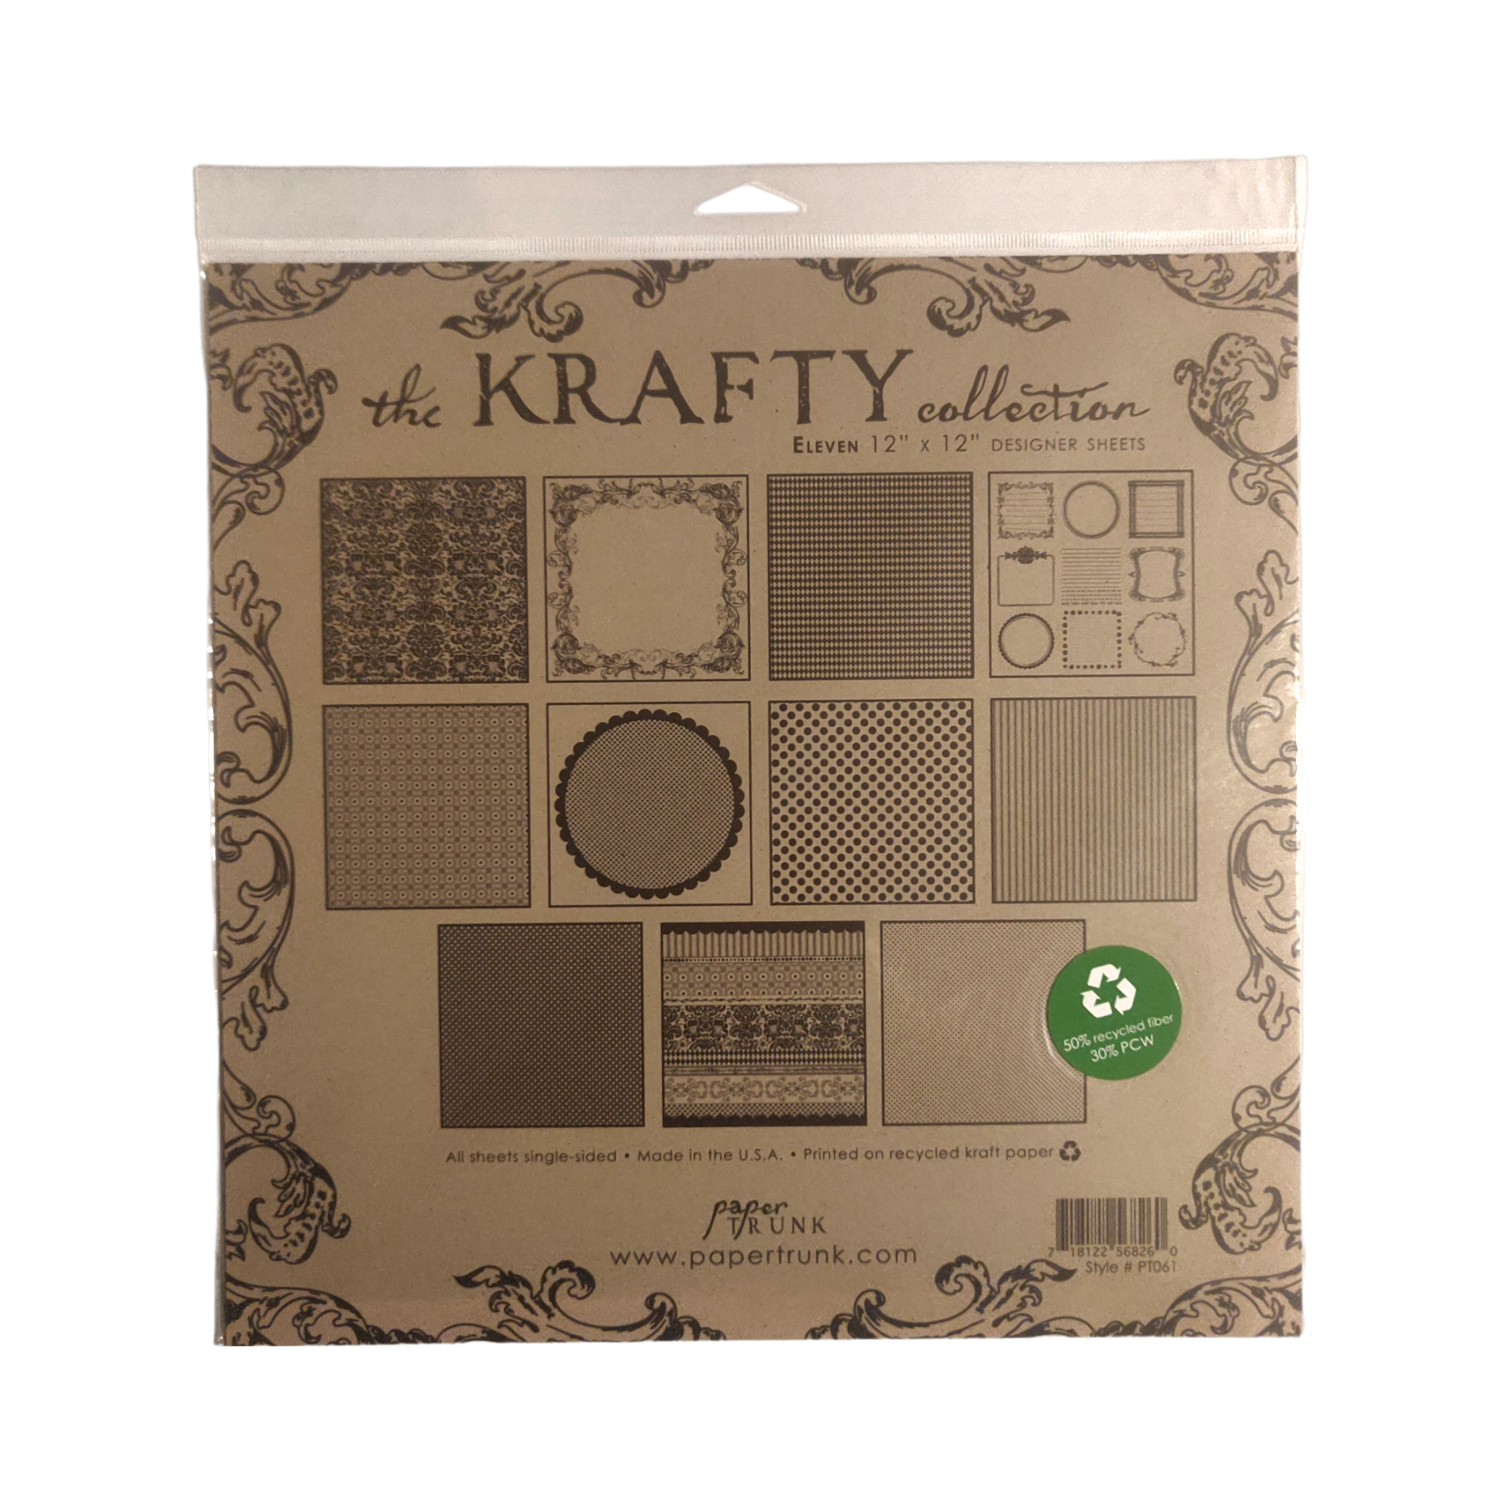 11x Designer Sheets of 12" x 12" Kraft Paper "the KRAFTY collection" by Papertrunk